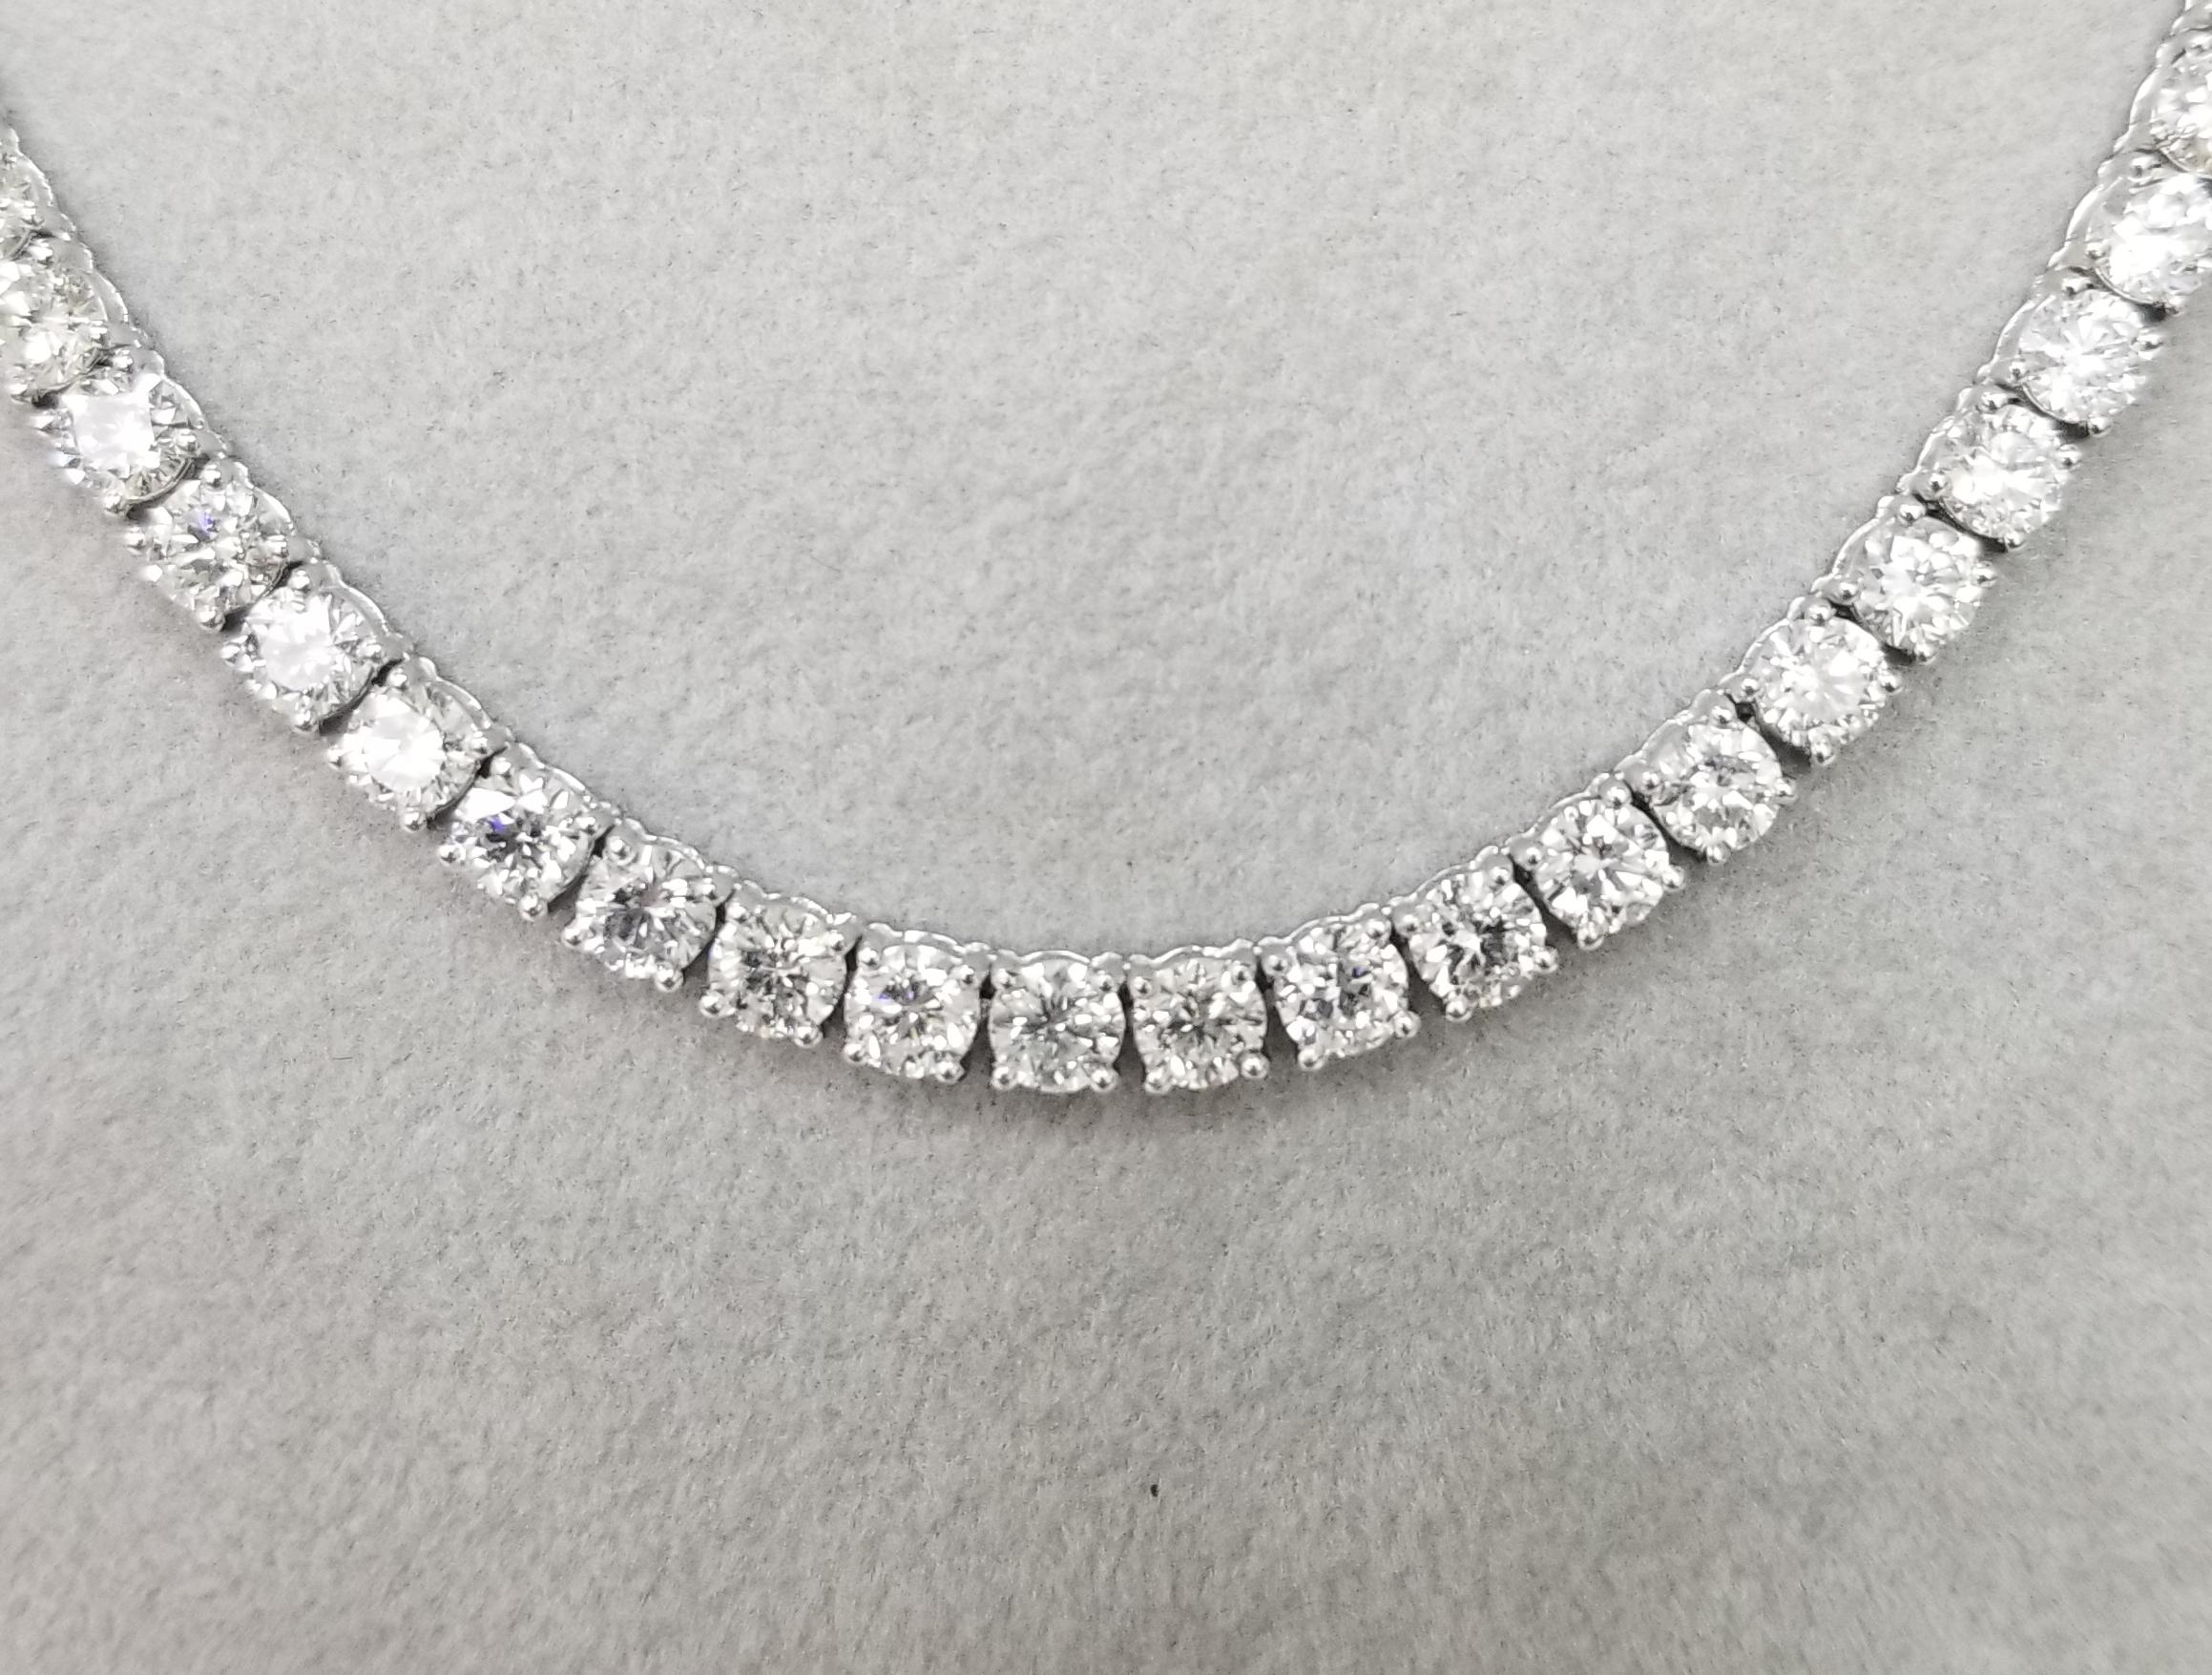 About
18k white gold 4 prong diamond necklace, containing 
 Specifications:
    main stone: ROUND CUT DIAMONDS
    diamonds: 110 PIECES
    carat total weight: 20.51cts.
    center diamond:  3.6mm
    color: F-G
    clarity: VS2-SI2
    brand: